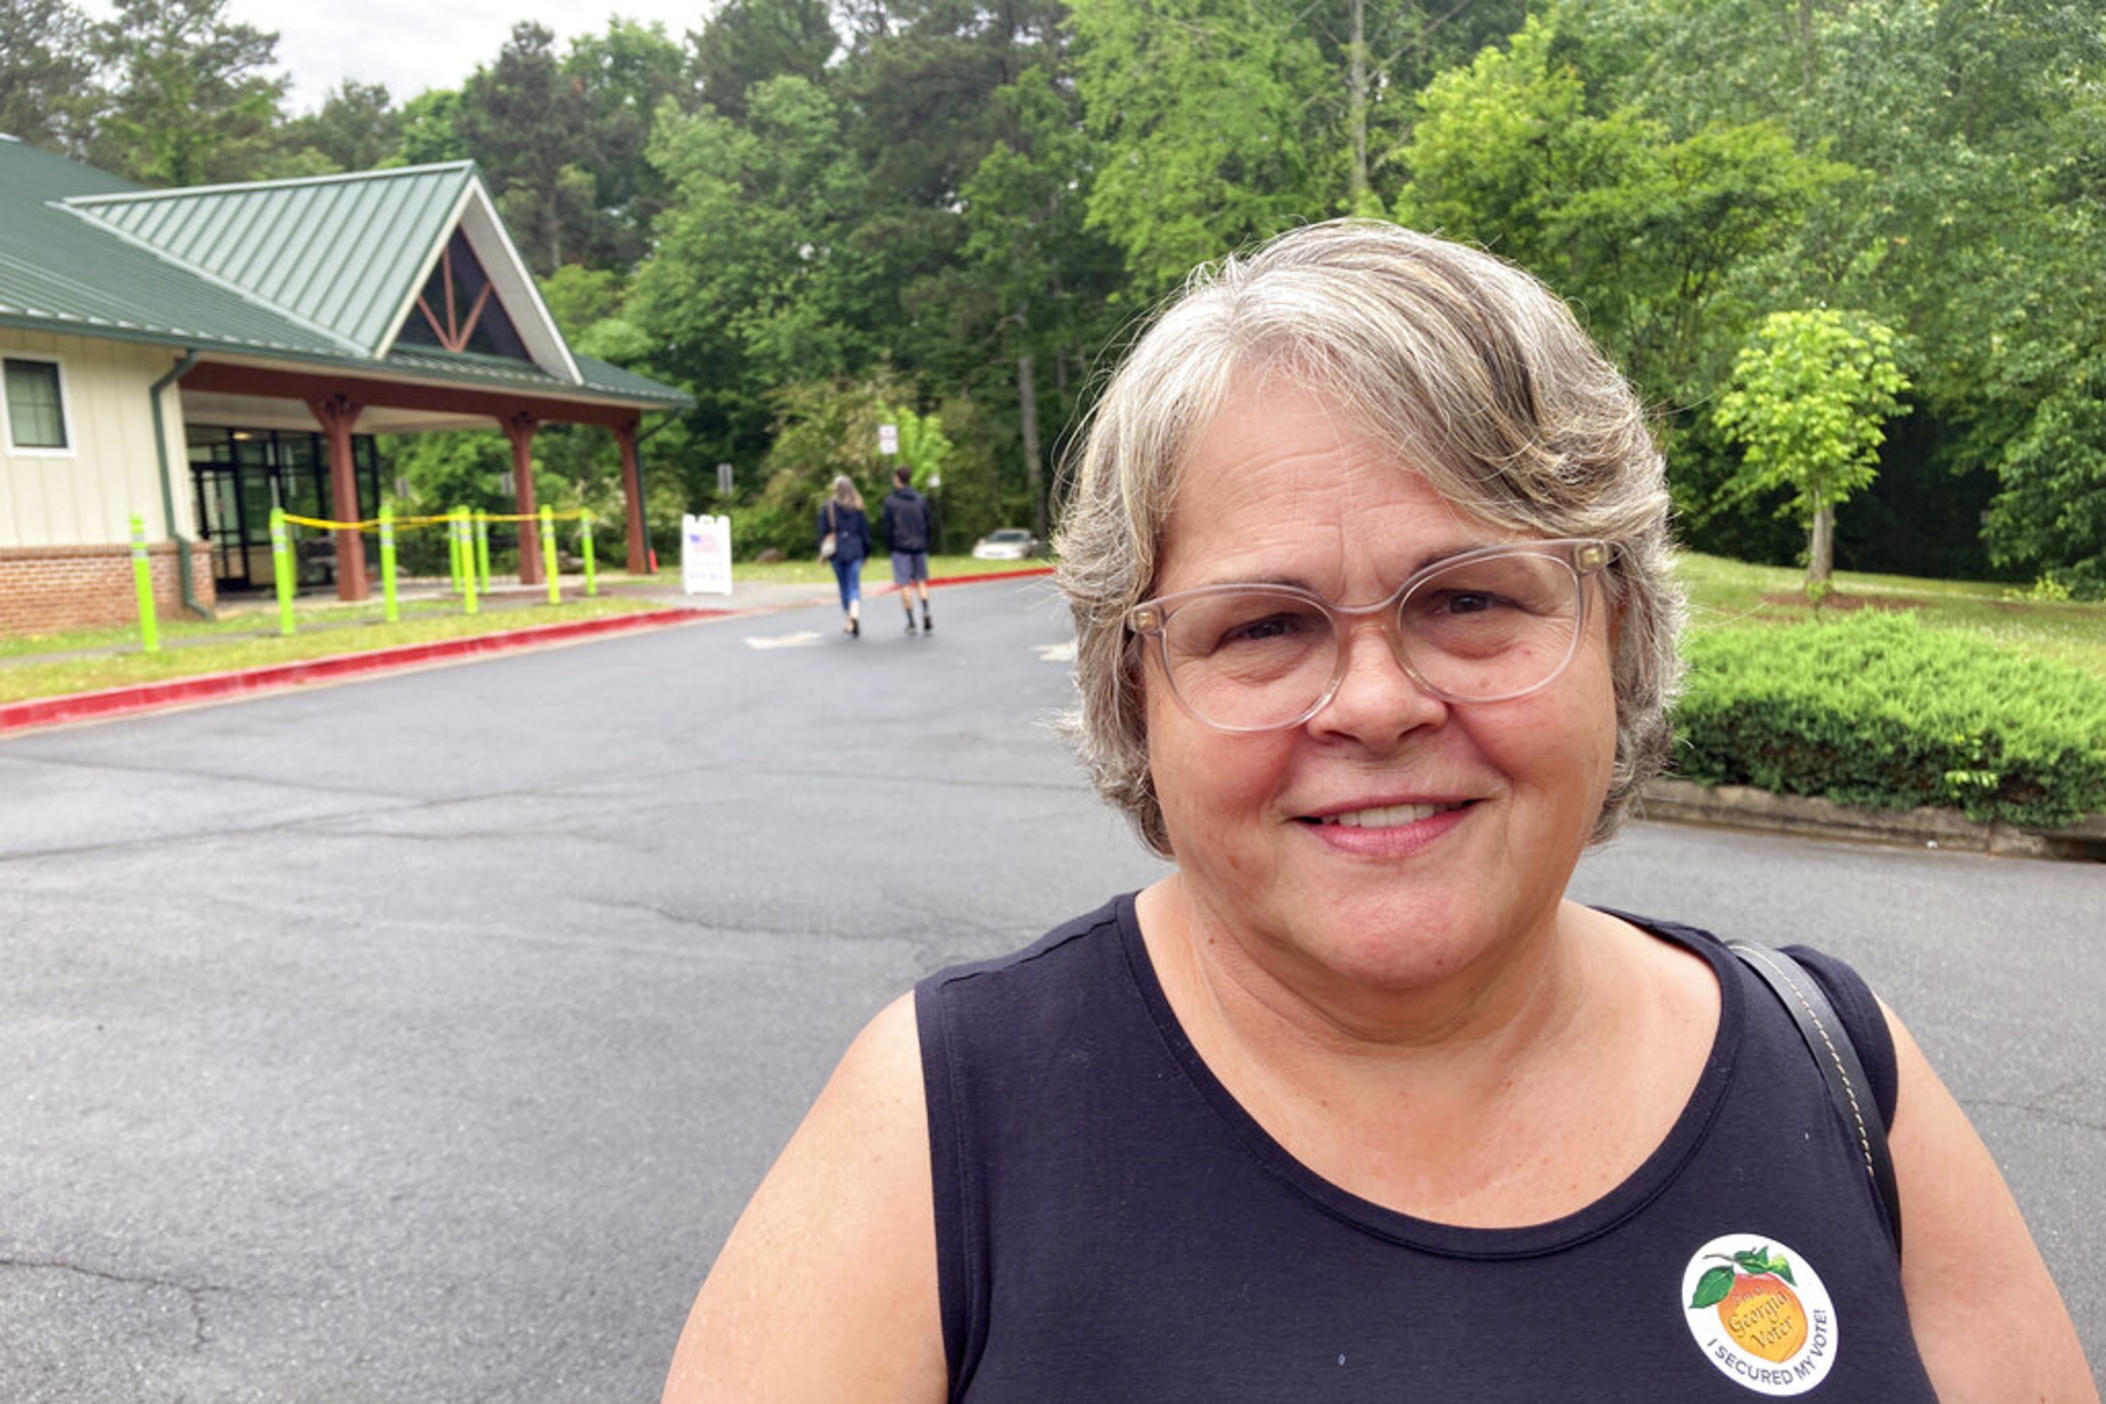 Debbie Hamby, 66, casts a ballot at an early voting site in Acworth, Ga., on Friday, May 6, 2022. Hamby, a nurse from Kennesaw, Georgia, says she believes in-person voting is more secure and supports limits on mail ballots.